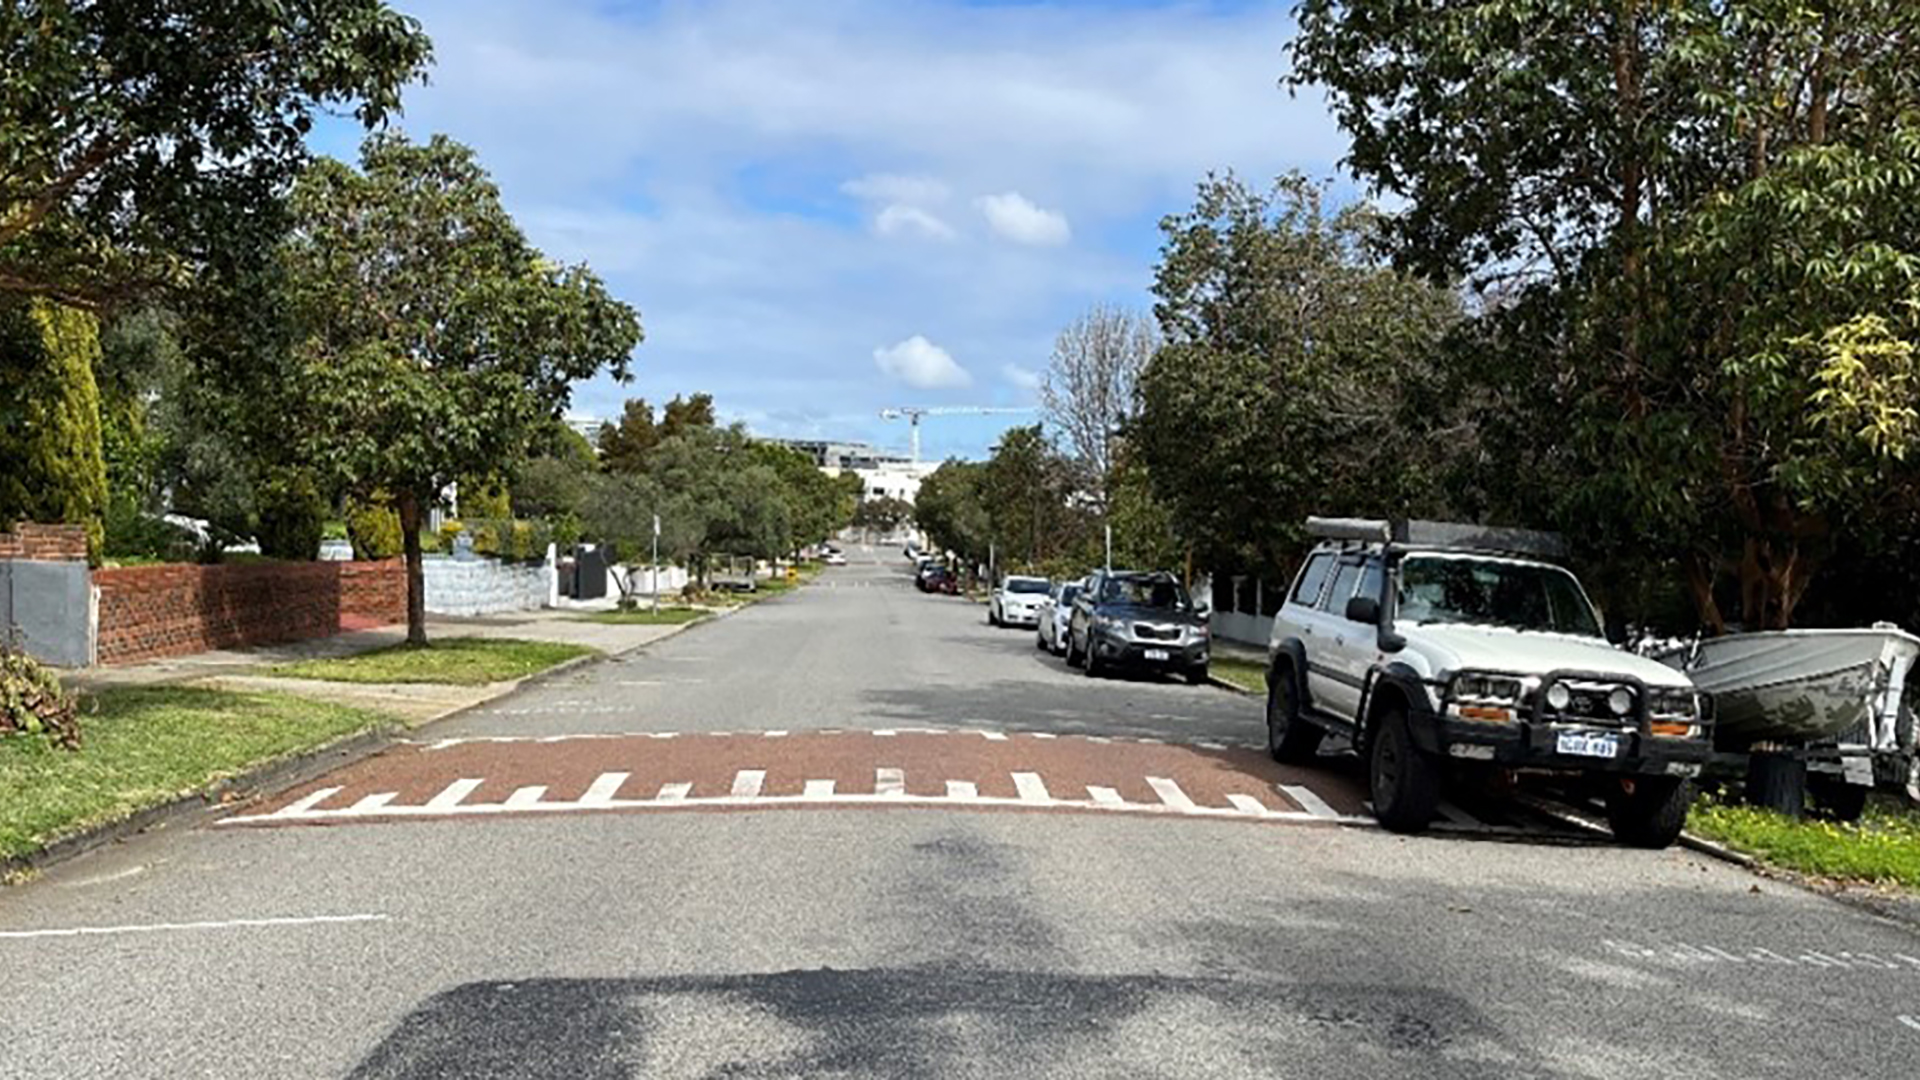 Midblock Speed Plateau (Example from Town of Vic Park)